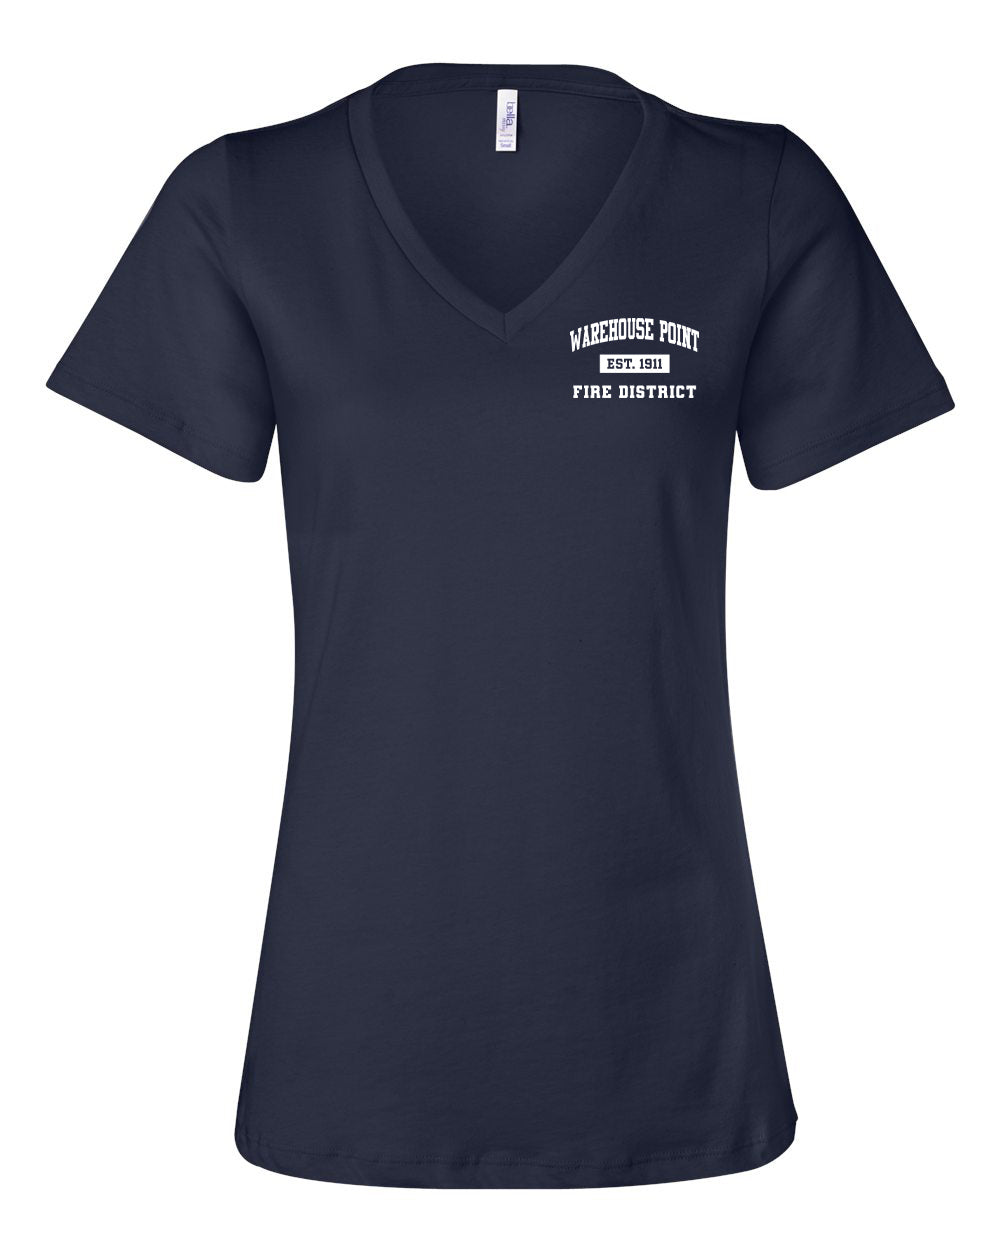 WHPFD Ladies Relaxed Jersey V-Neck Tee "EST Corner" - 6405 Navy